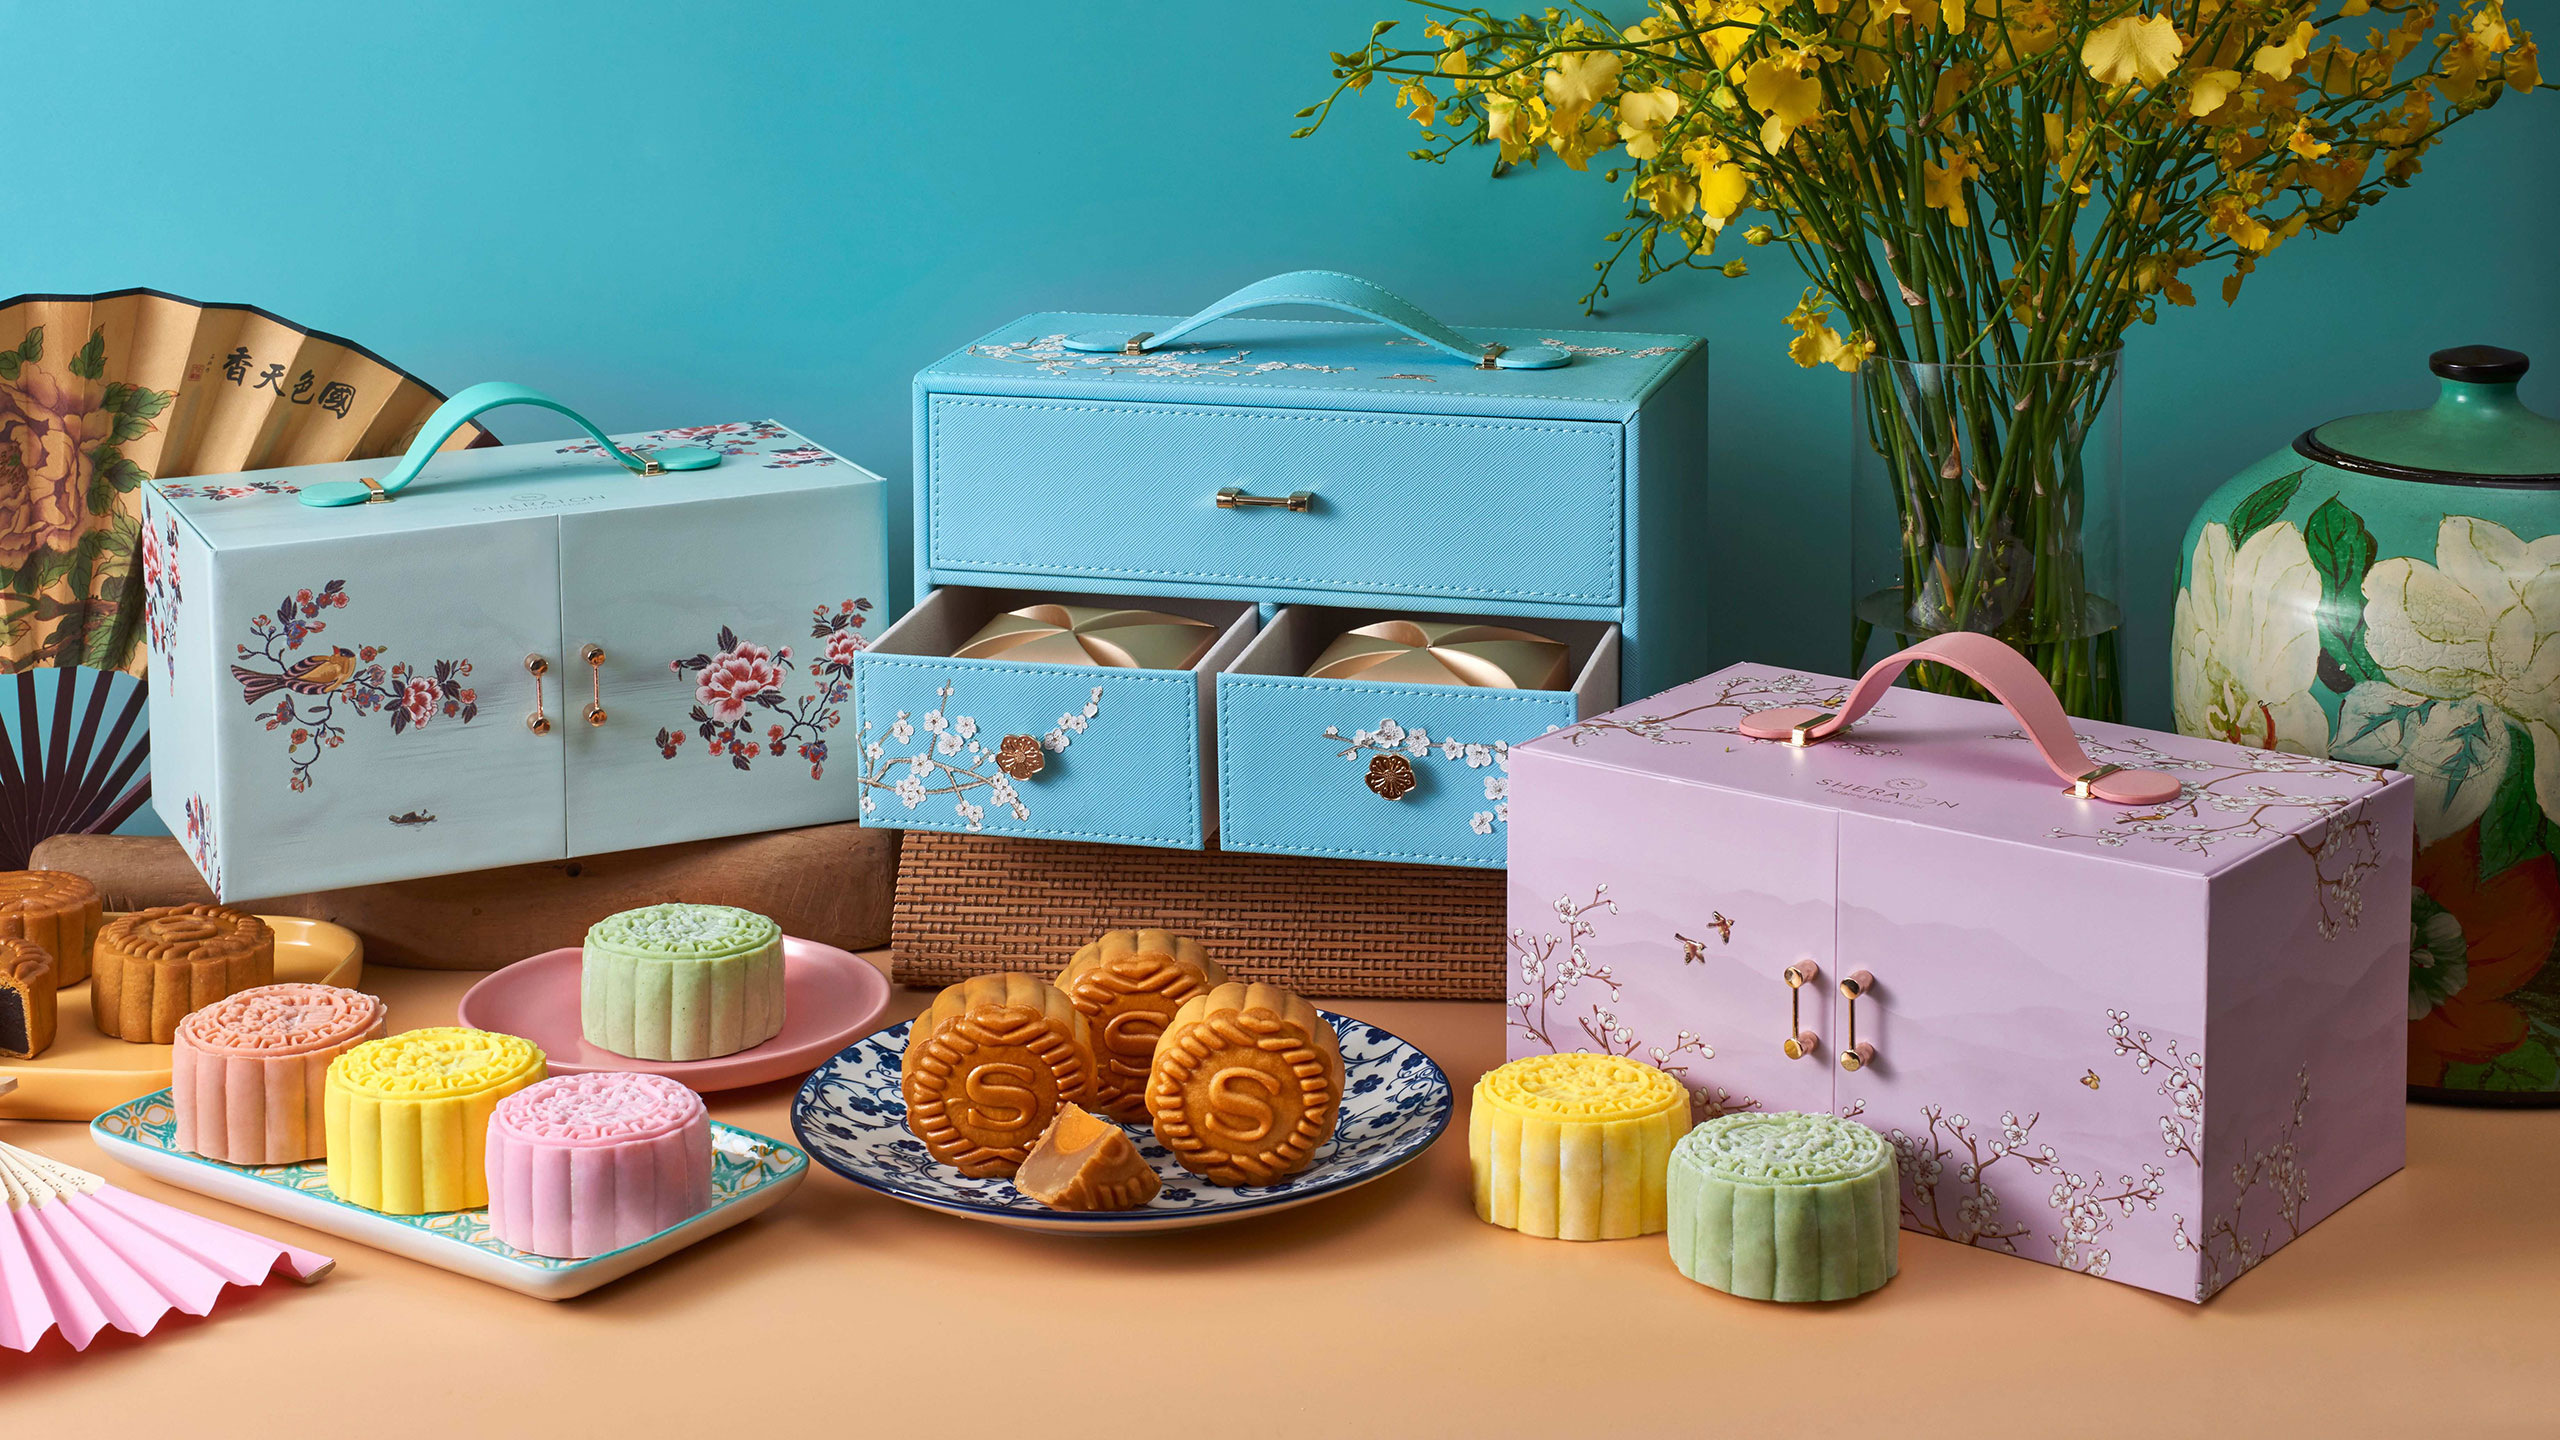 Mid-Autumn Festival 2022: The most unique mooncake flavours to try this year